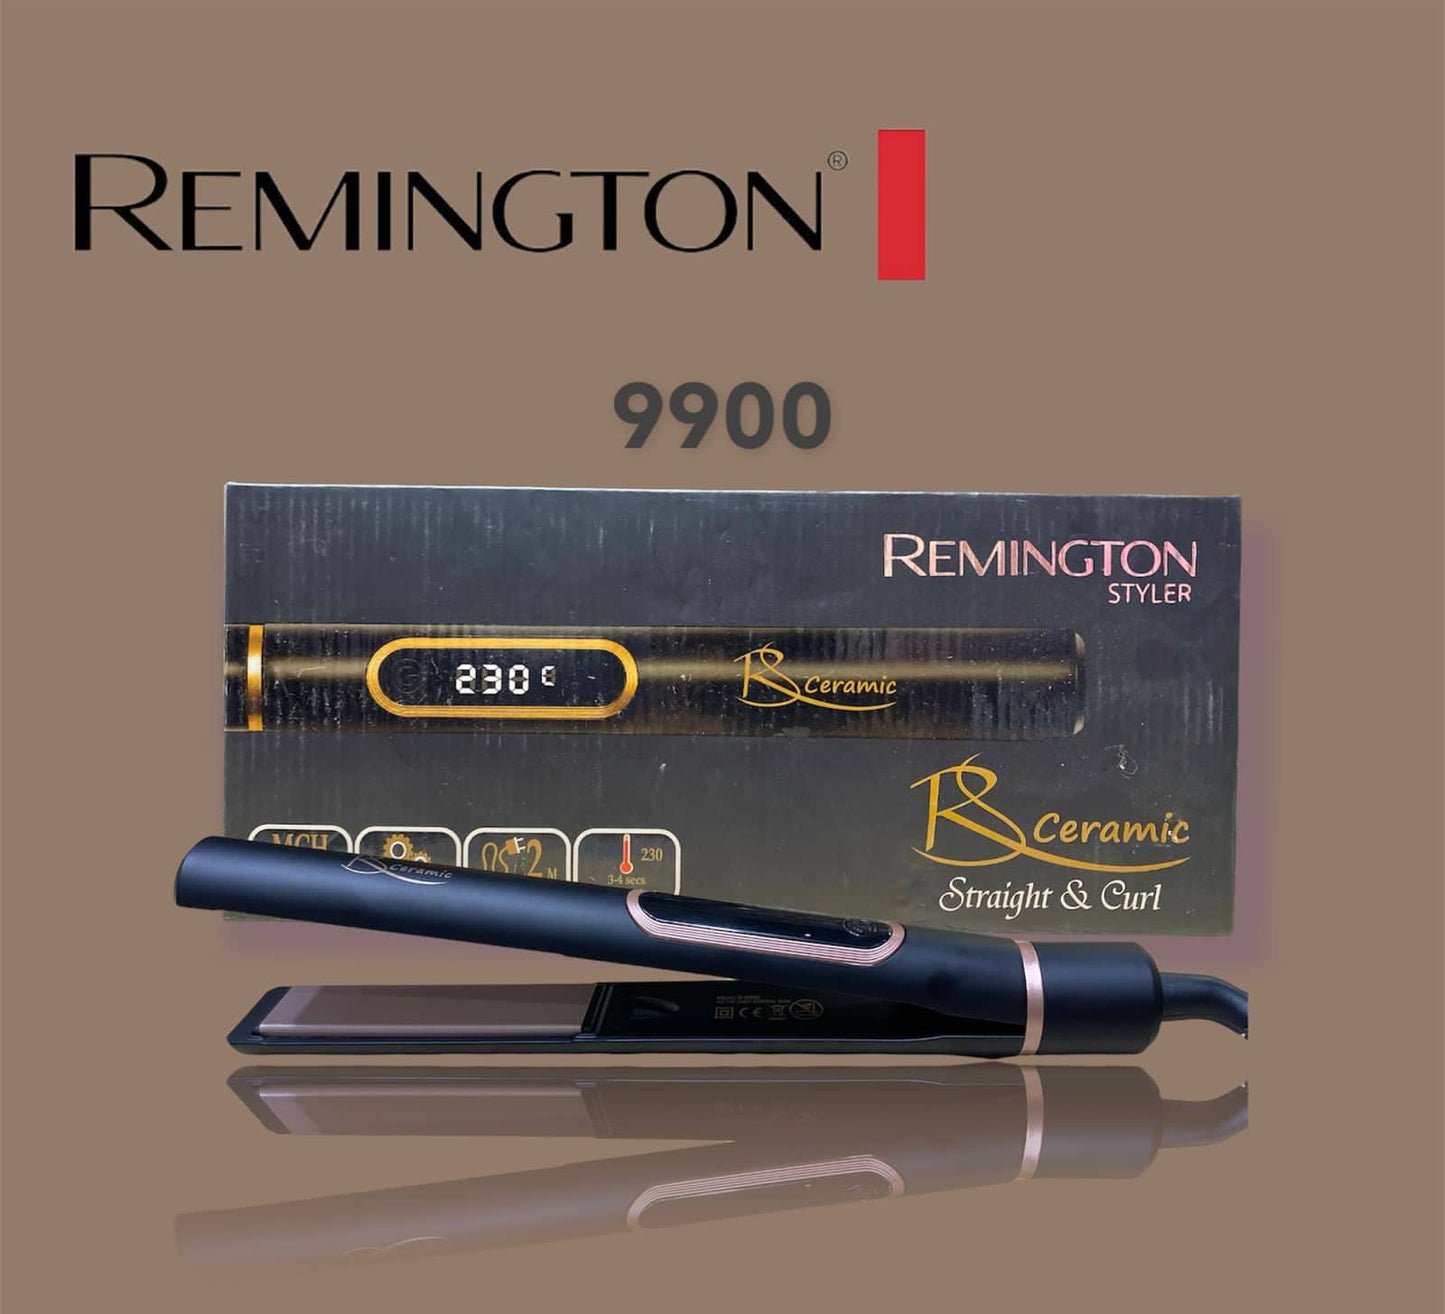 Remington Styler Ceremic Straight And Curl